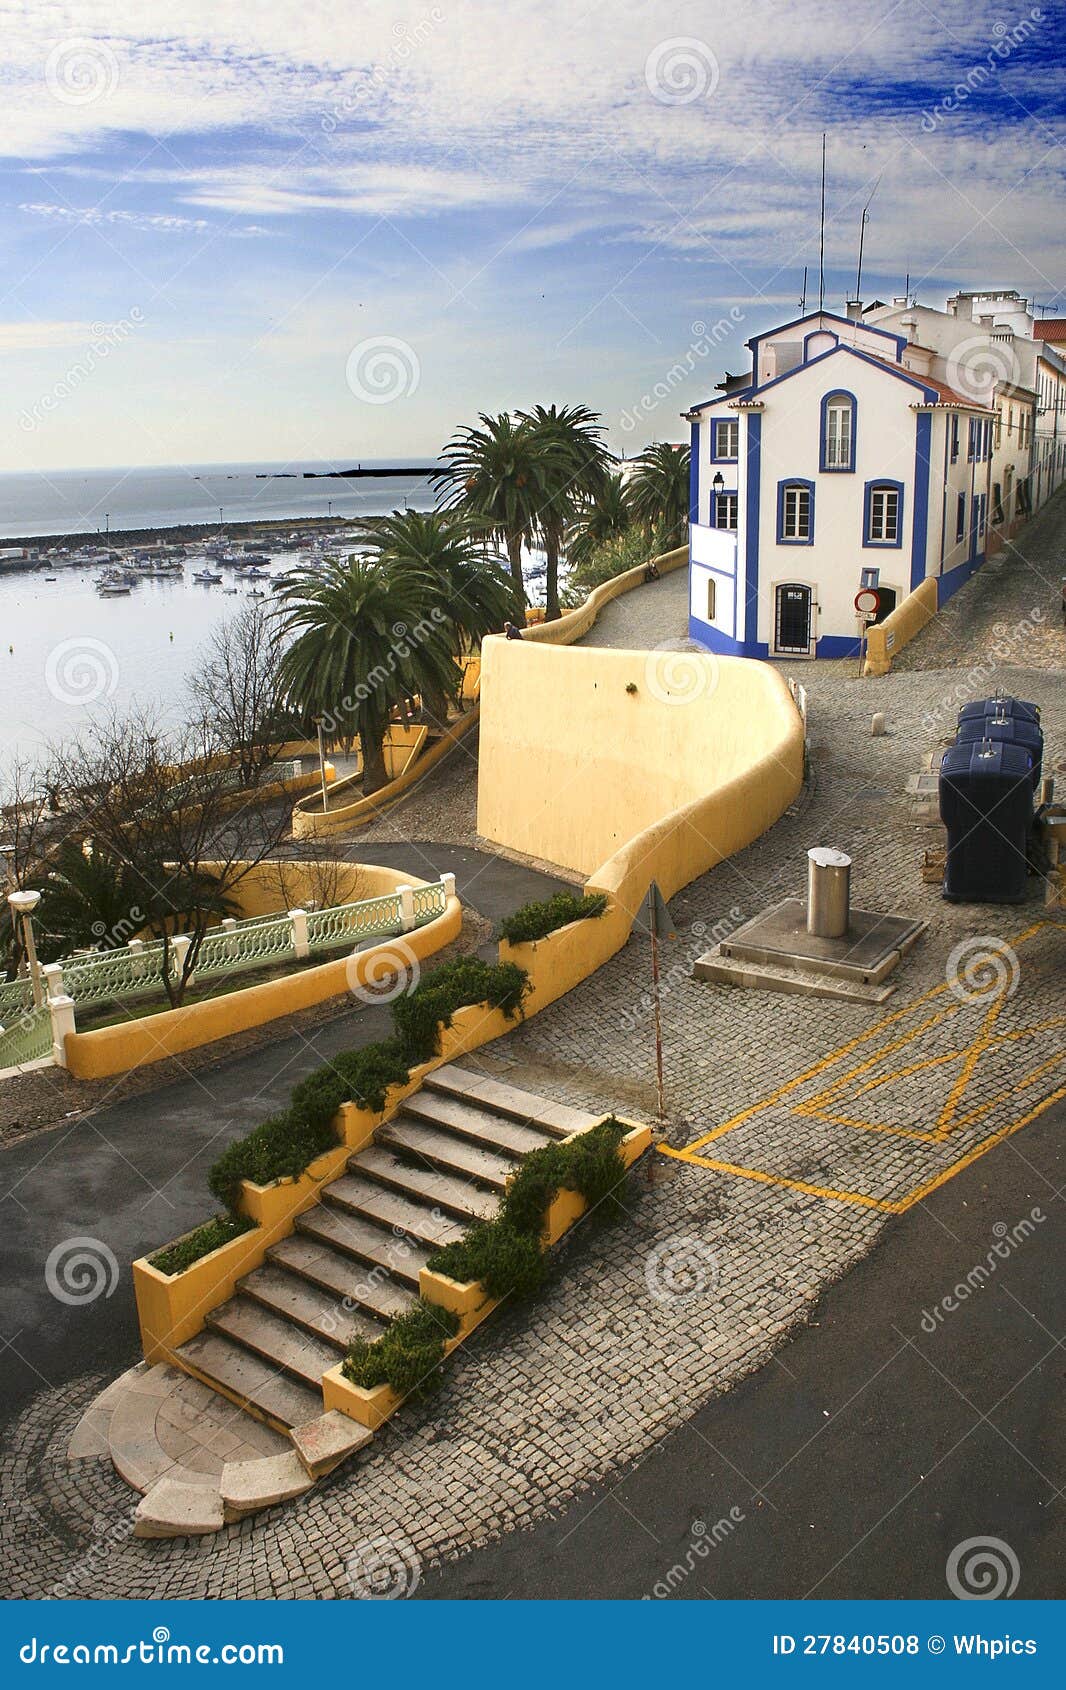 cityscape of sines, portugal